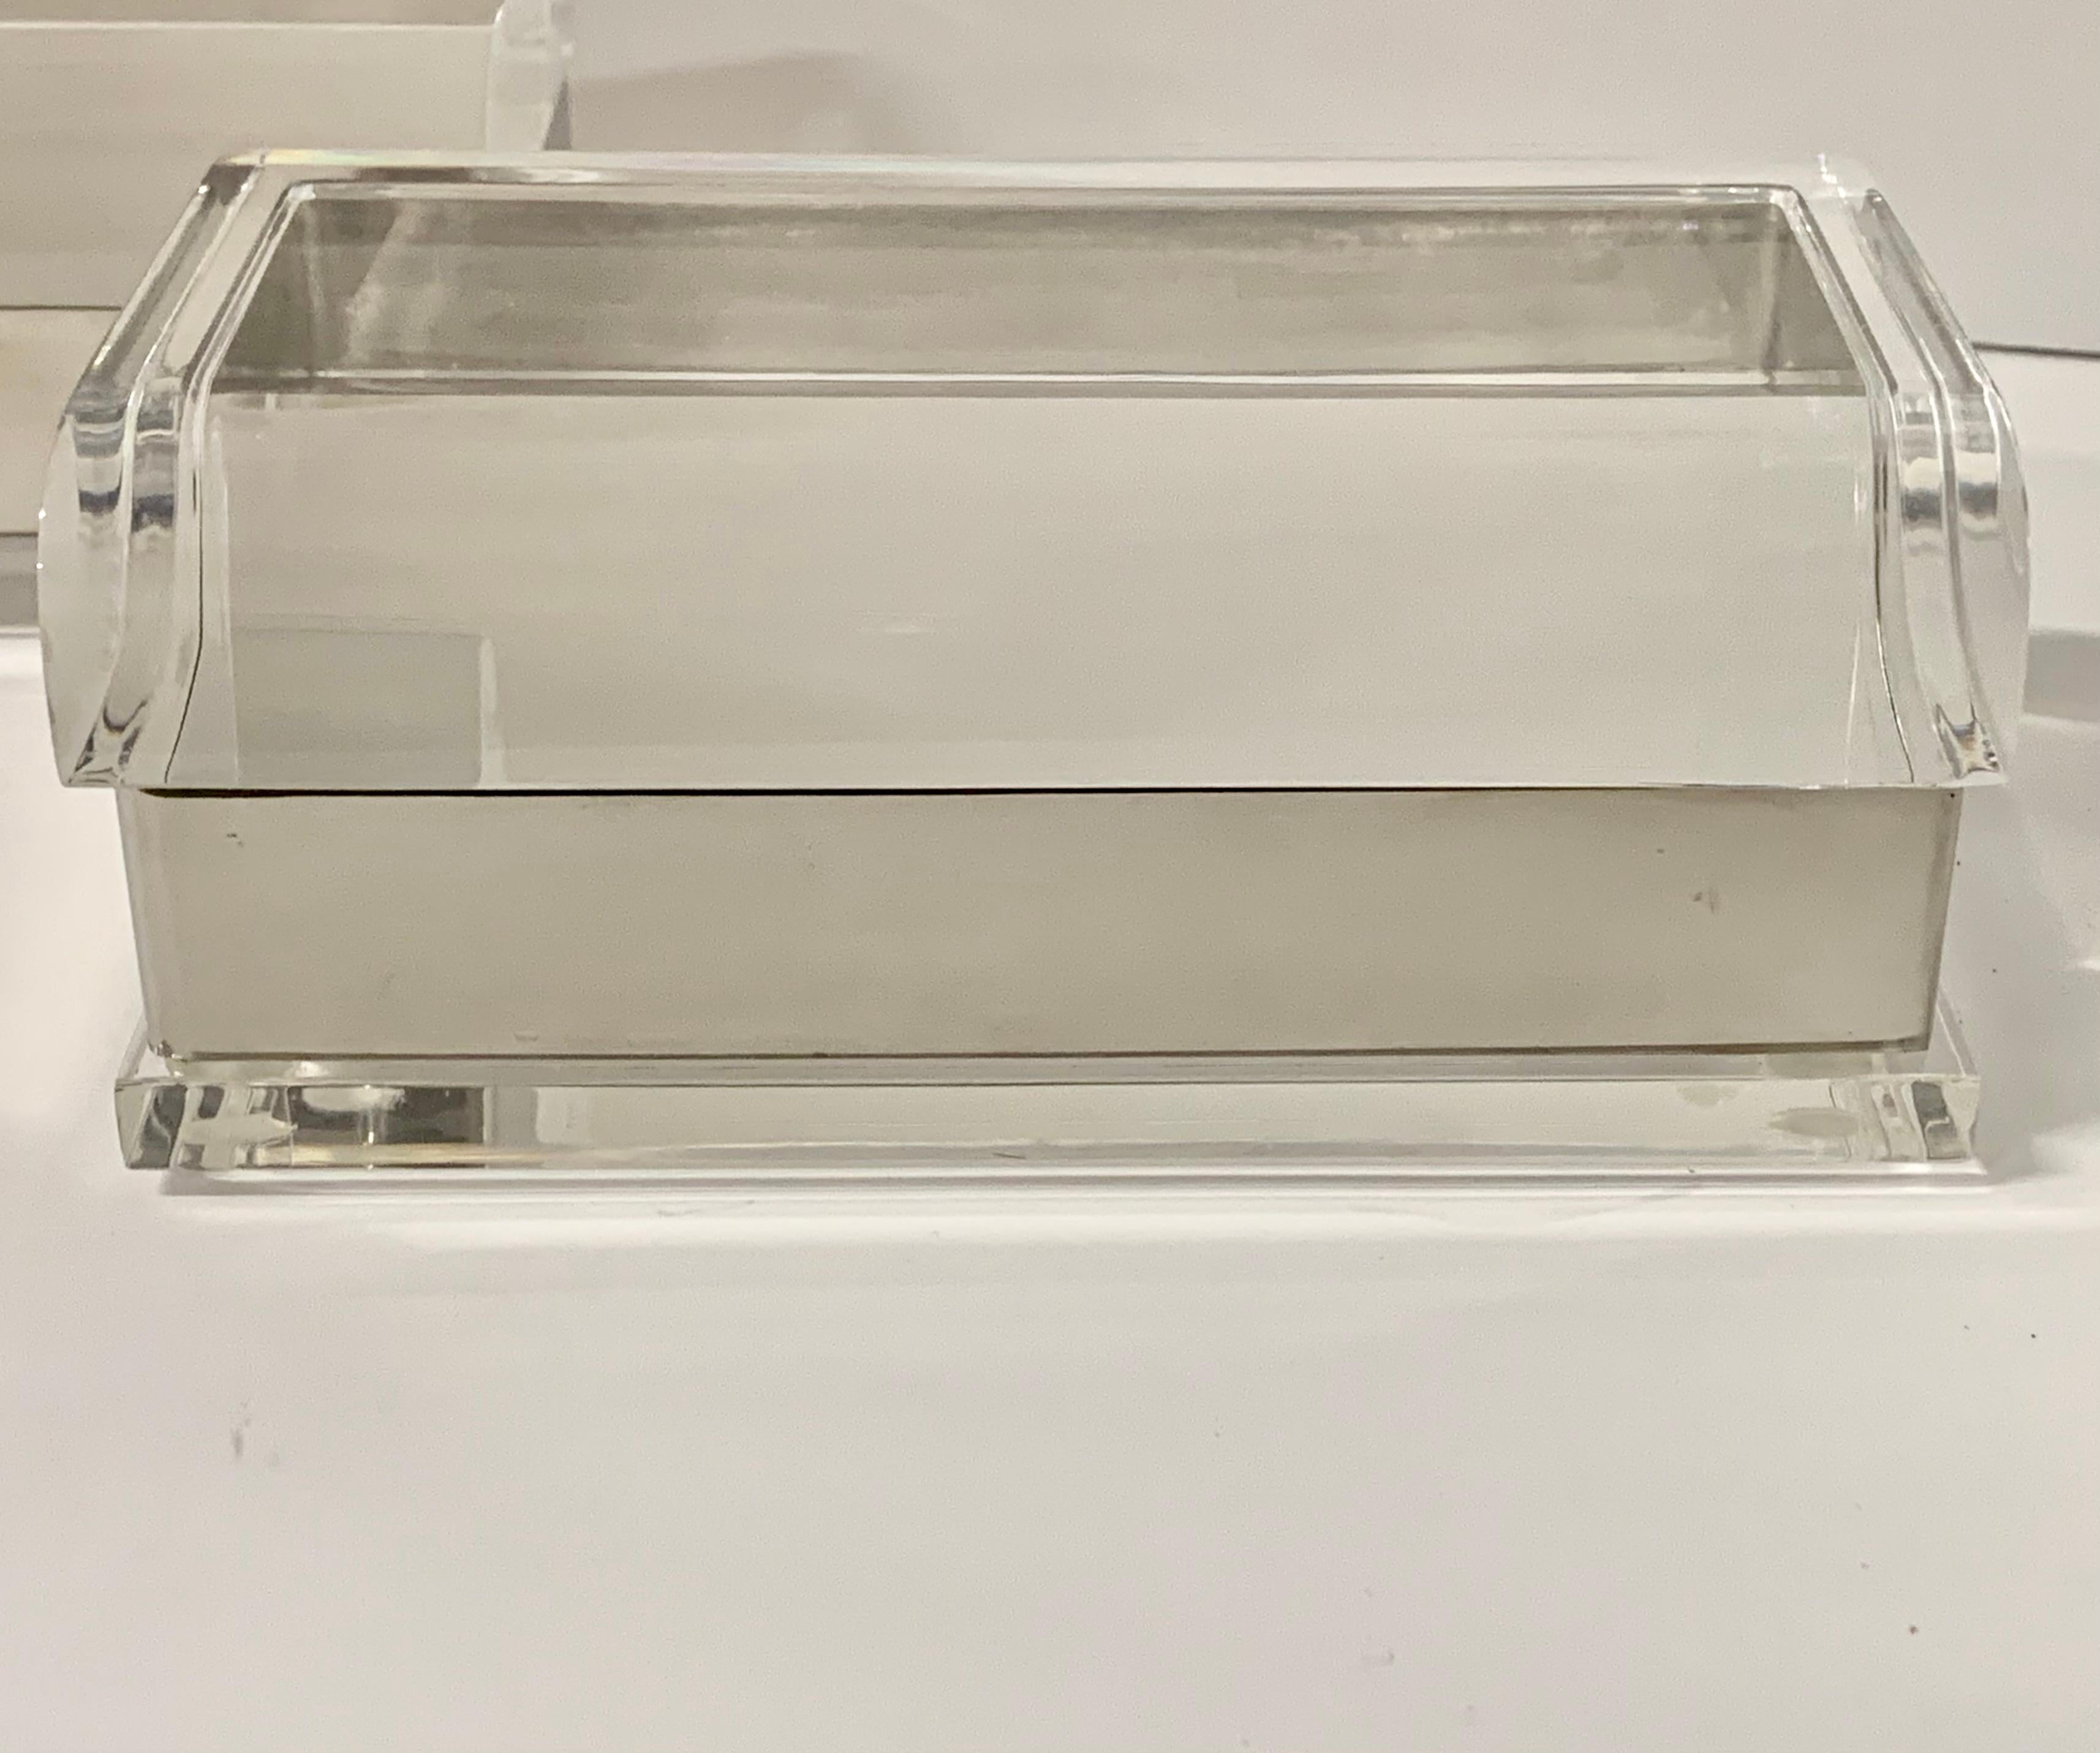 A pair of Charles Hollis Jones covered boxes in Lucite with nickel trim. These are vintage boxes purchased directly from Mr. Jones. They measure approx 7 by 4.25 inches in dimension and 3 inches in height. In good age appropriate vintage condition.